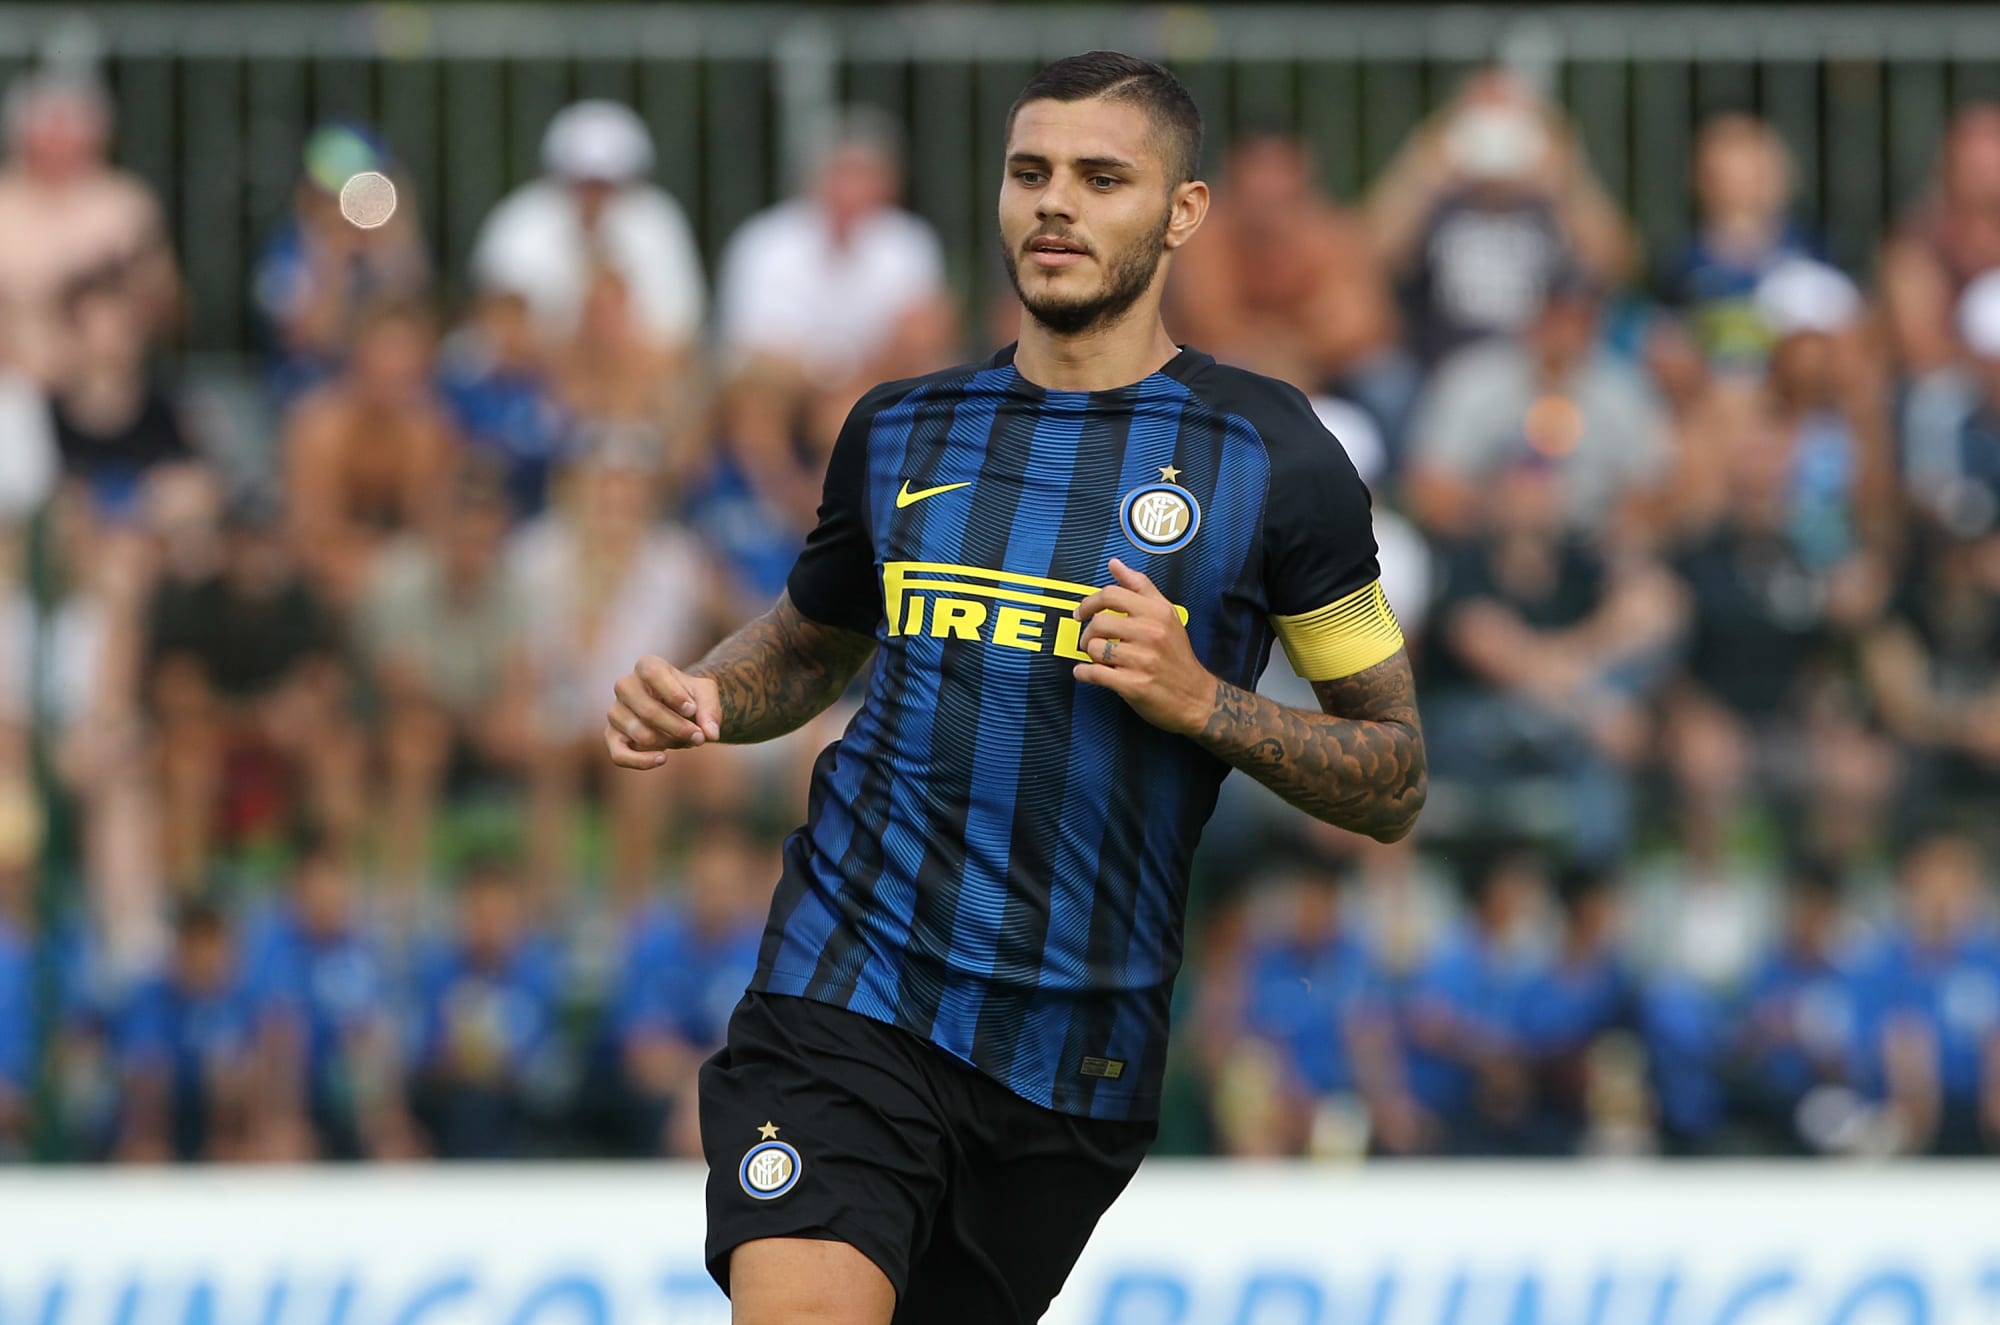 Inter's Mauro Icardi Still Being Linked to Tottenham